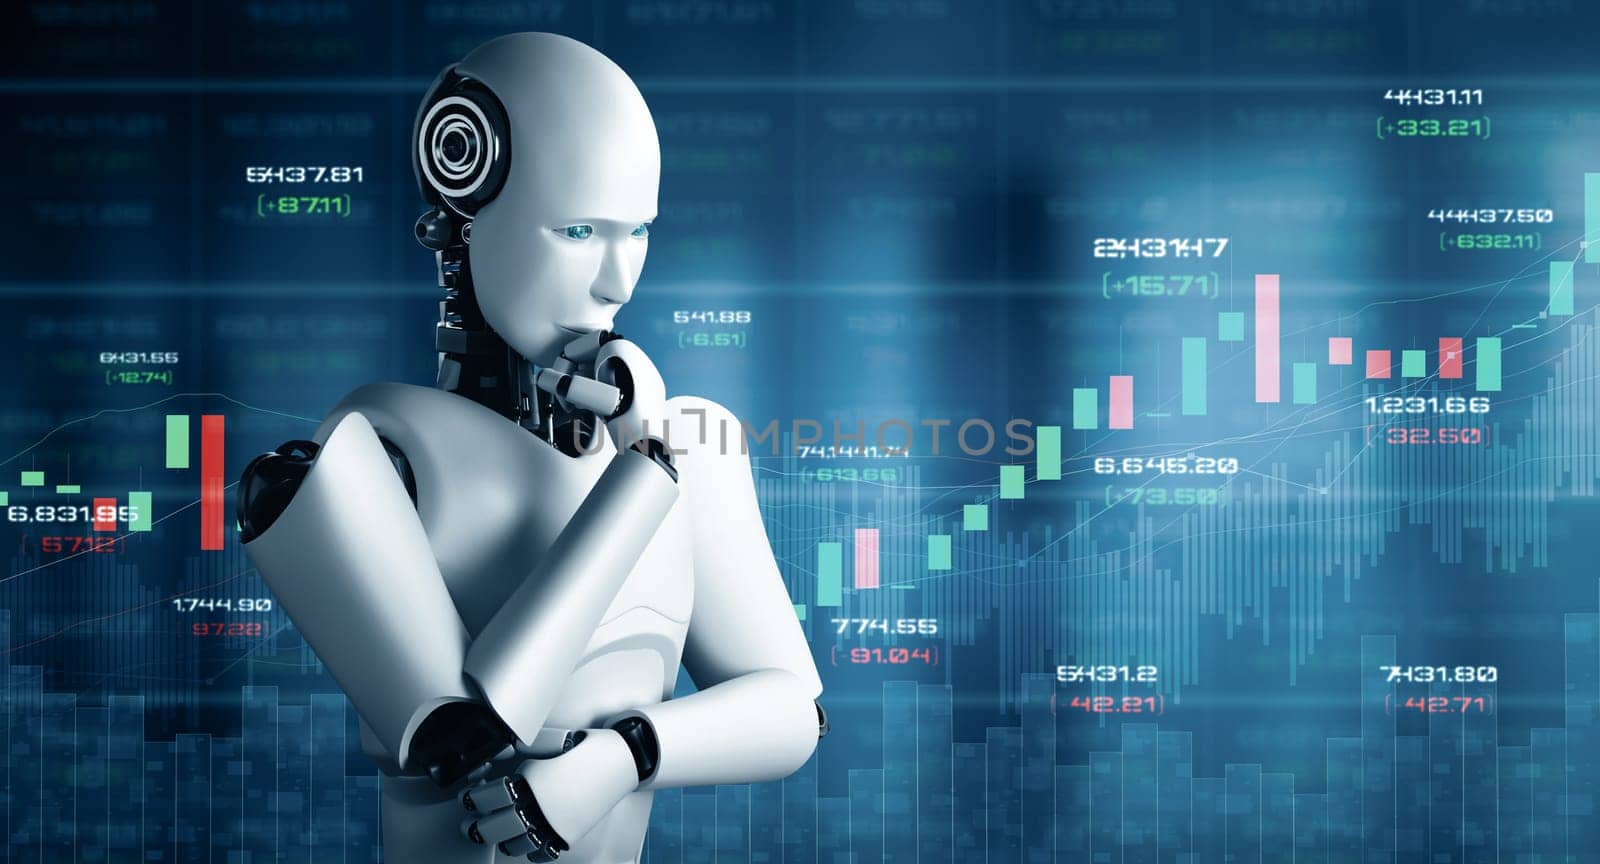 XAI Future financial technology controlled by AI robot using machine learning by biancoblue